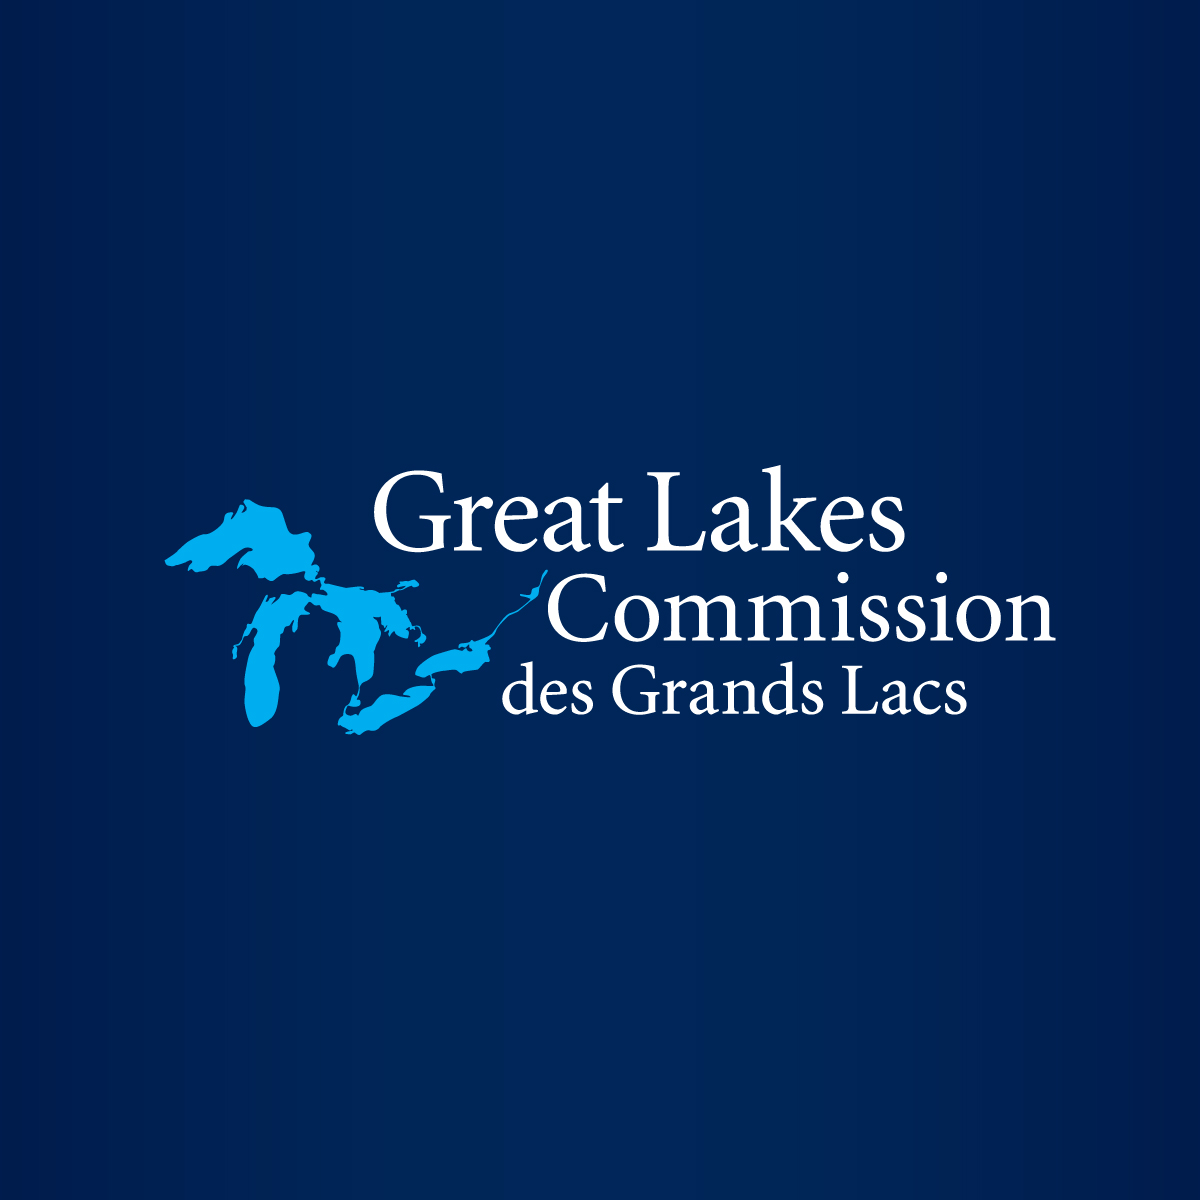 Great Lakes research vessels begin annual fish surveys